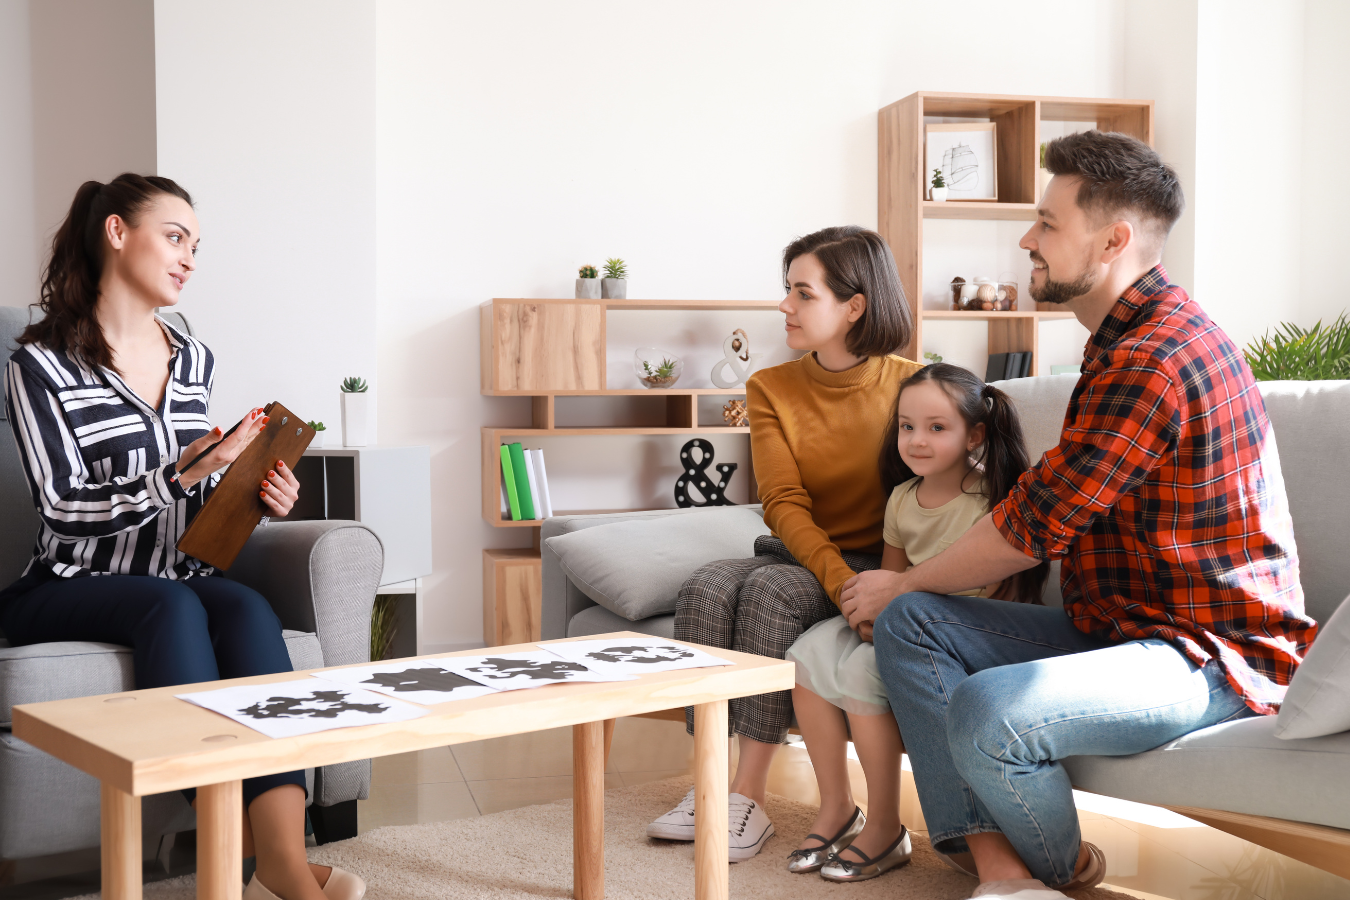 A photo of a counsellor and a family with a Mother, a Father, and a young, school aged daughter. ERPs can help Family Services organizations maximize their care for their clients.